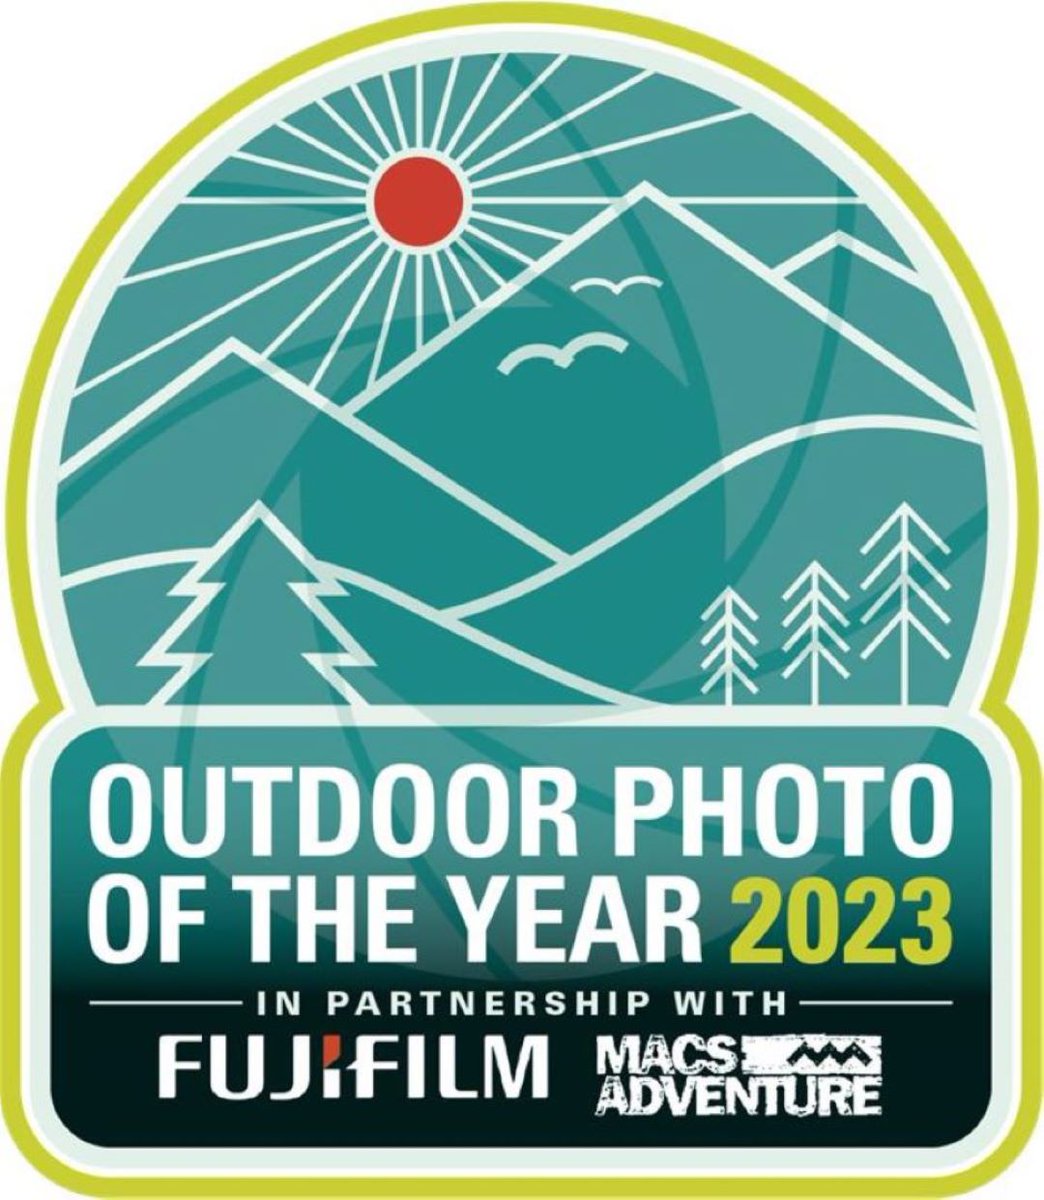 With a massive thank you to our sponsors FujiFilm & Macs Adventure, the results are in for our Outdoor Photo of The Year competition! THE WINNERS ARE… visit the link below! livefortheoutdoors.com/opoty/